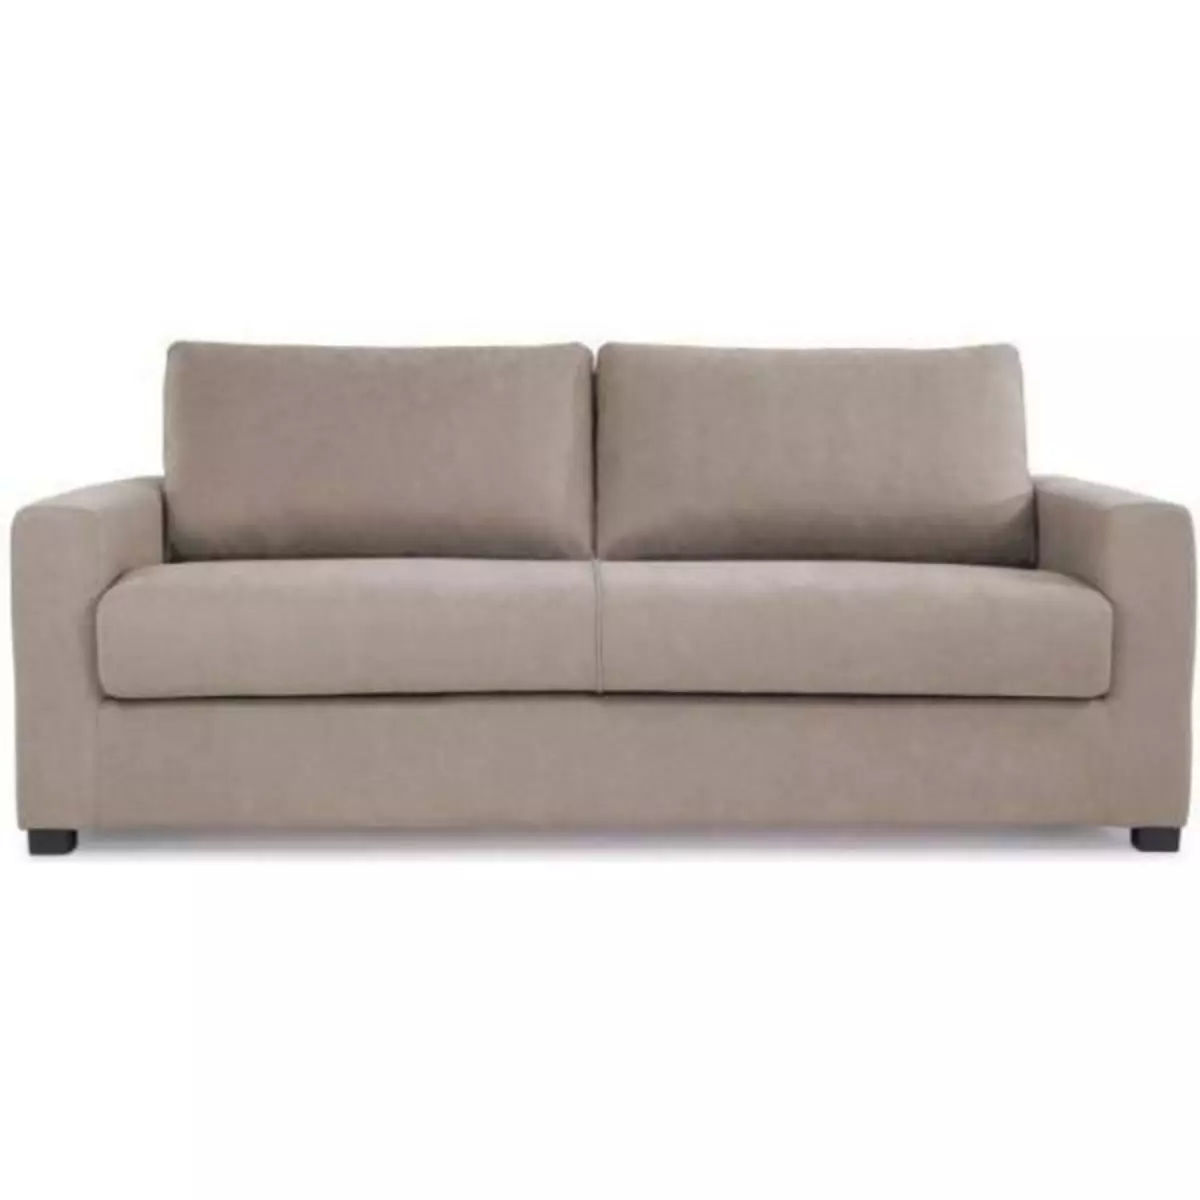 MARKET24 HEXAGONE Canapé droit convertible 3 places MAXIME - Made in France - Tissu Beige - Couchage express - L 194 x P 96 x H 83 cm